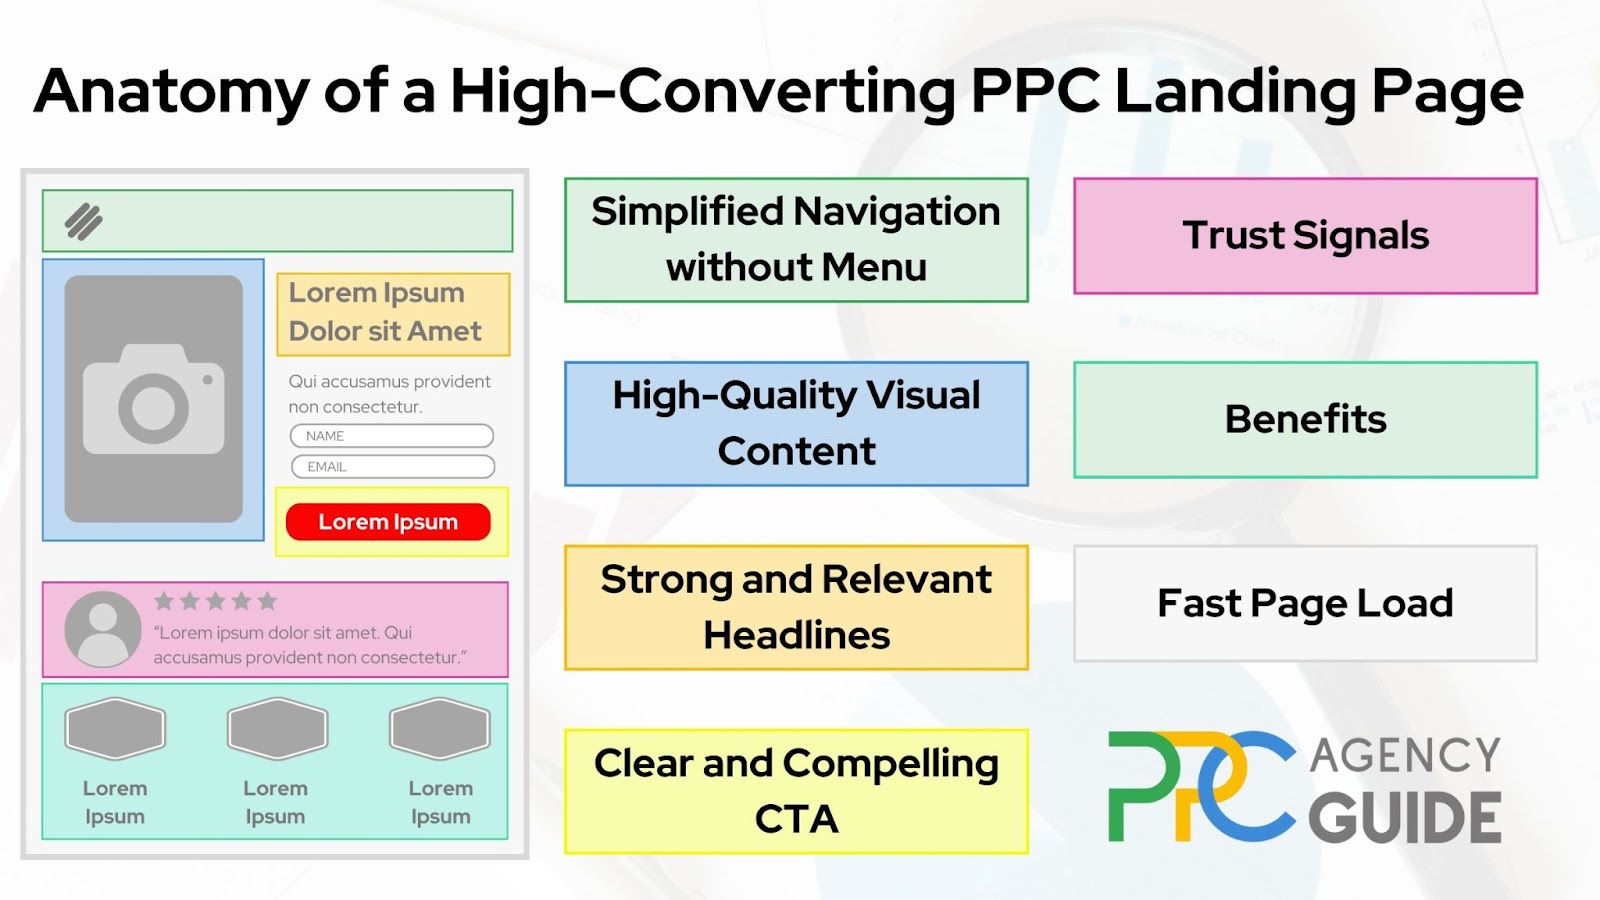 Anatomy of a High-Converting PPC Landing Page